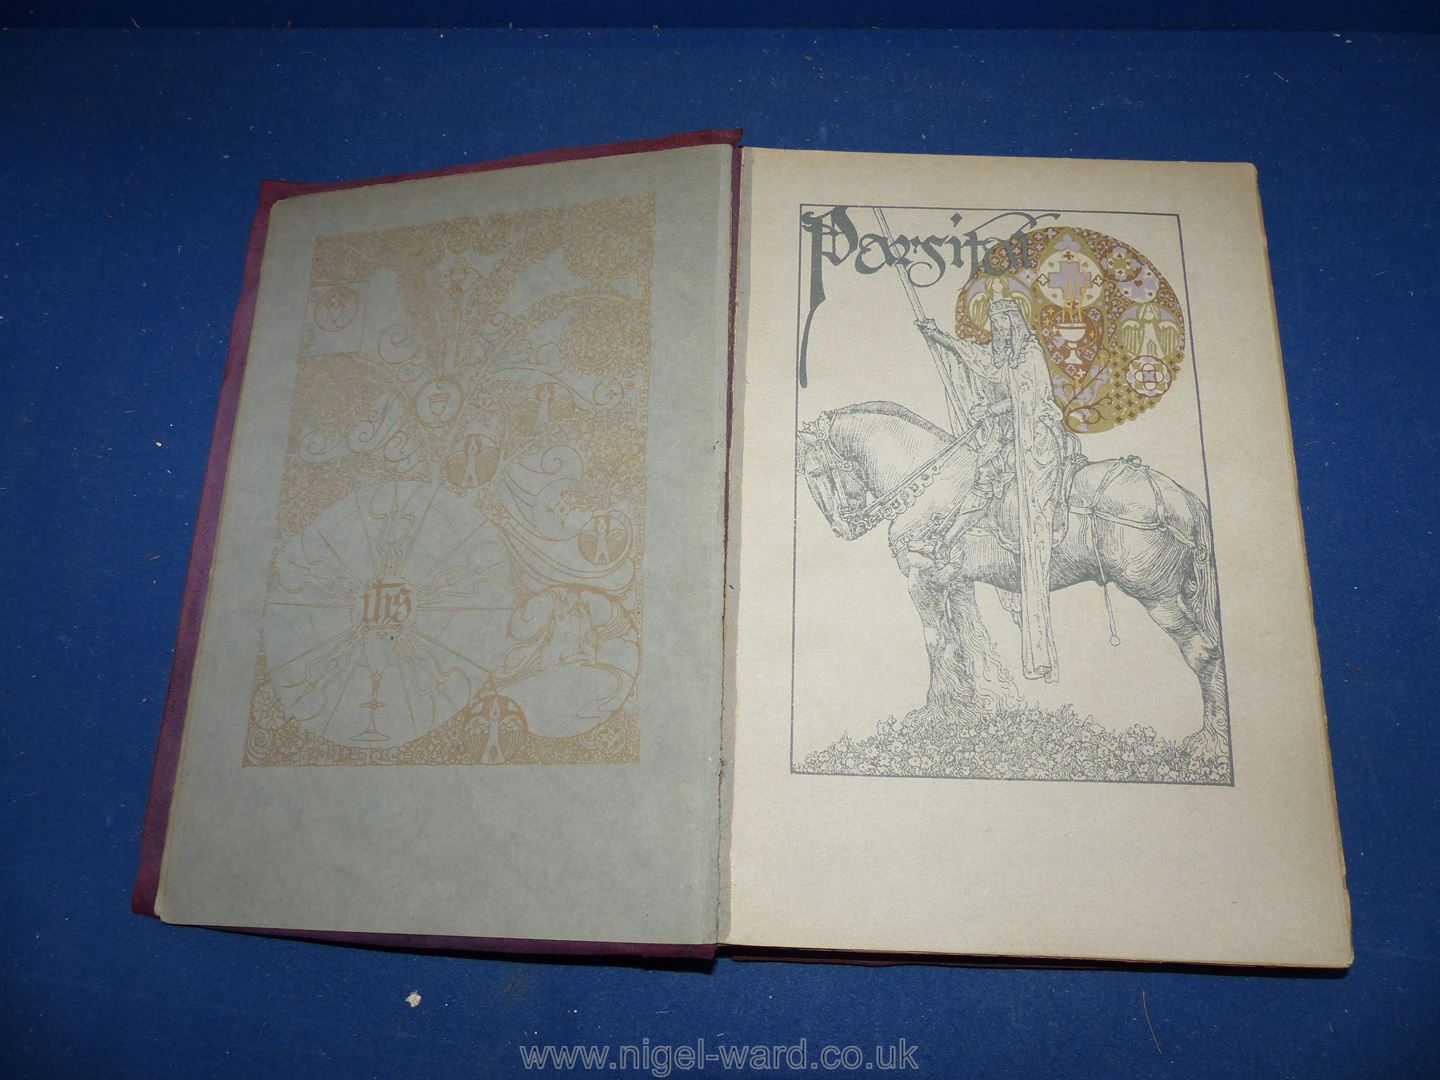 Parsifal by T.W. Rollerton, presented by Willy Pogany Harrap & Co. London 1912. - Image 4 of 7